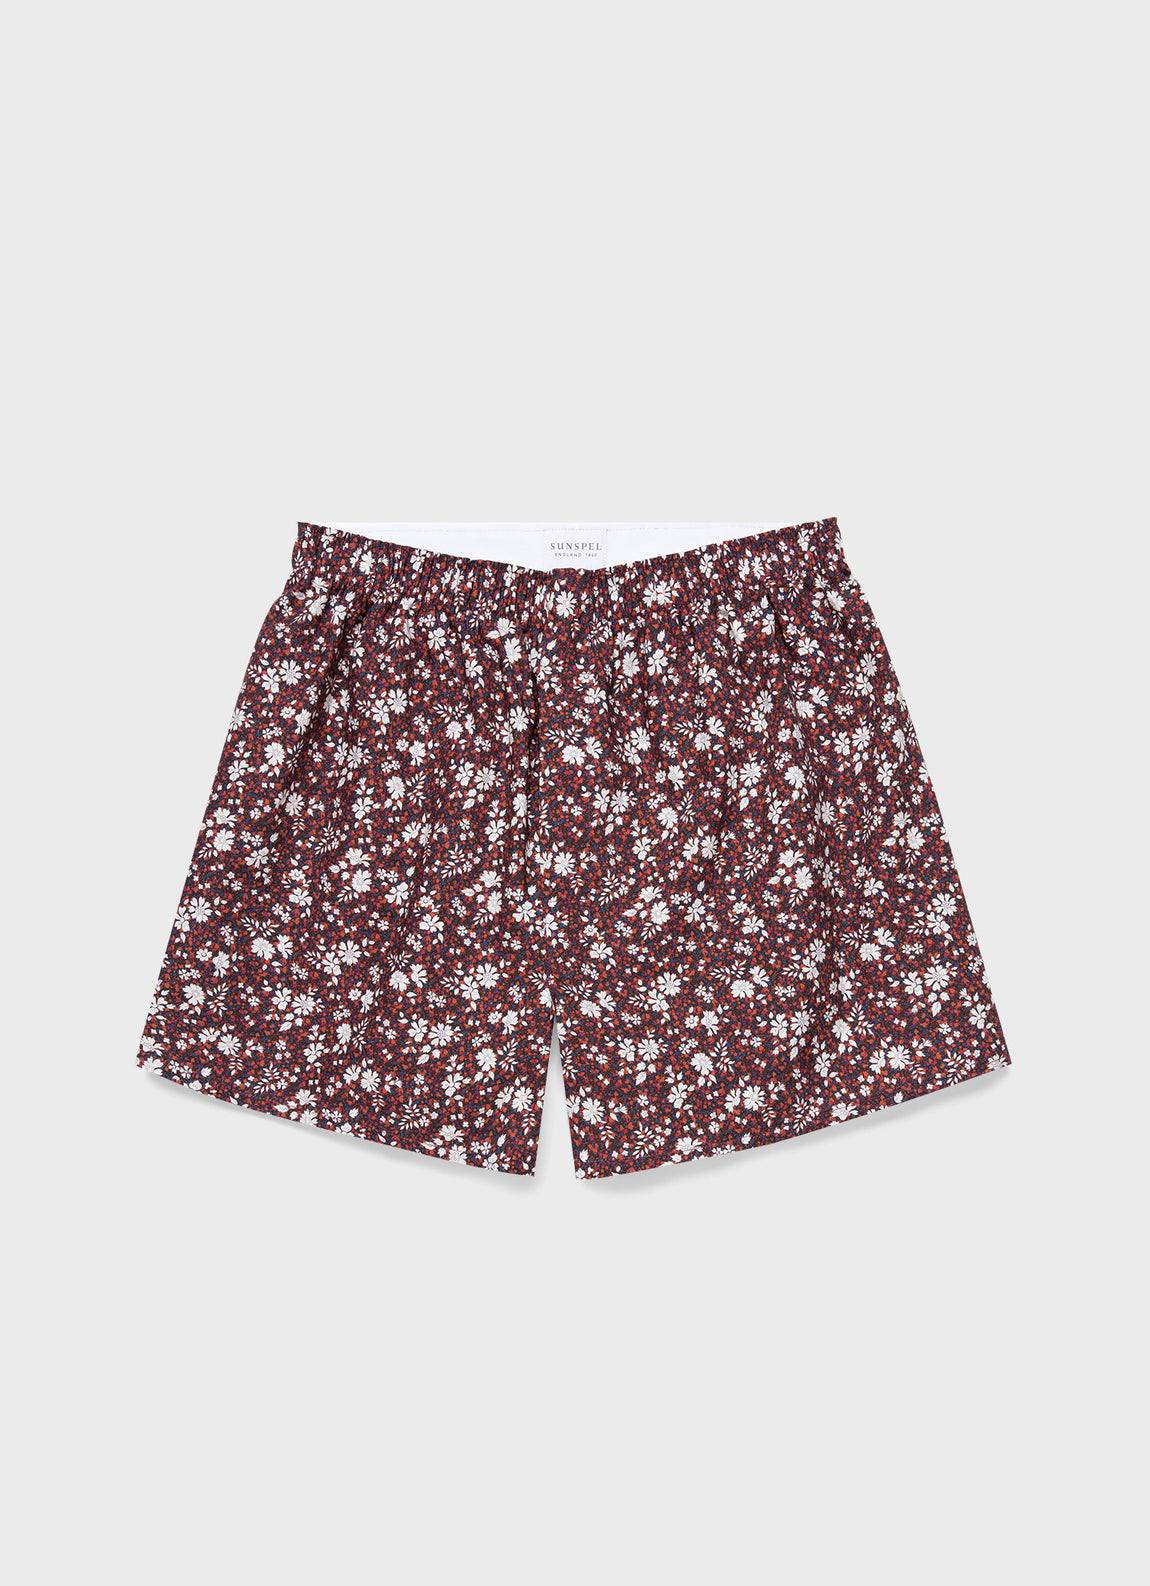 Men's Classic Boxer Shorts in Liberty Fabric Red Pepper Floral | Sunspel